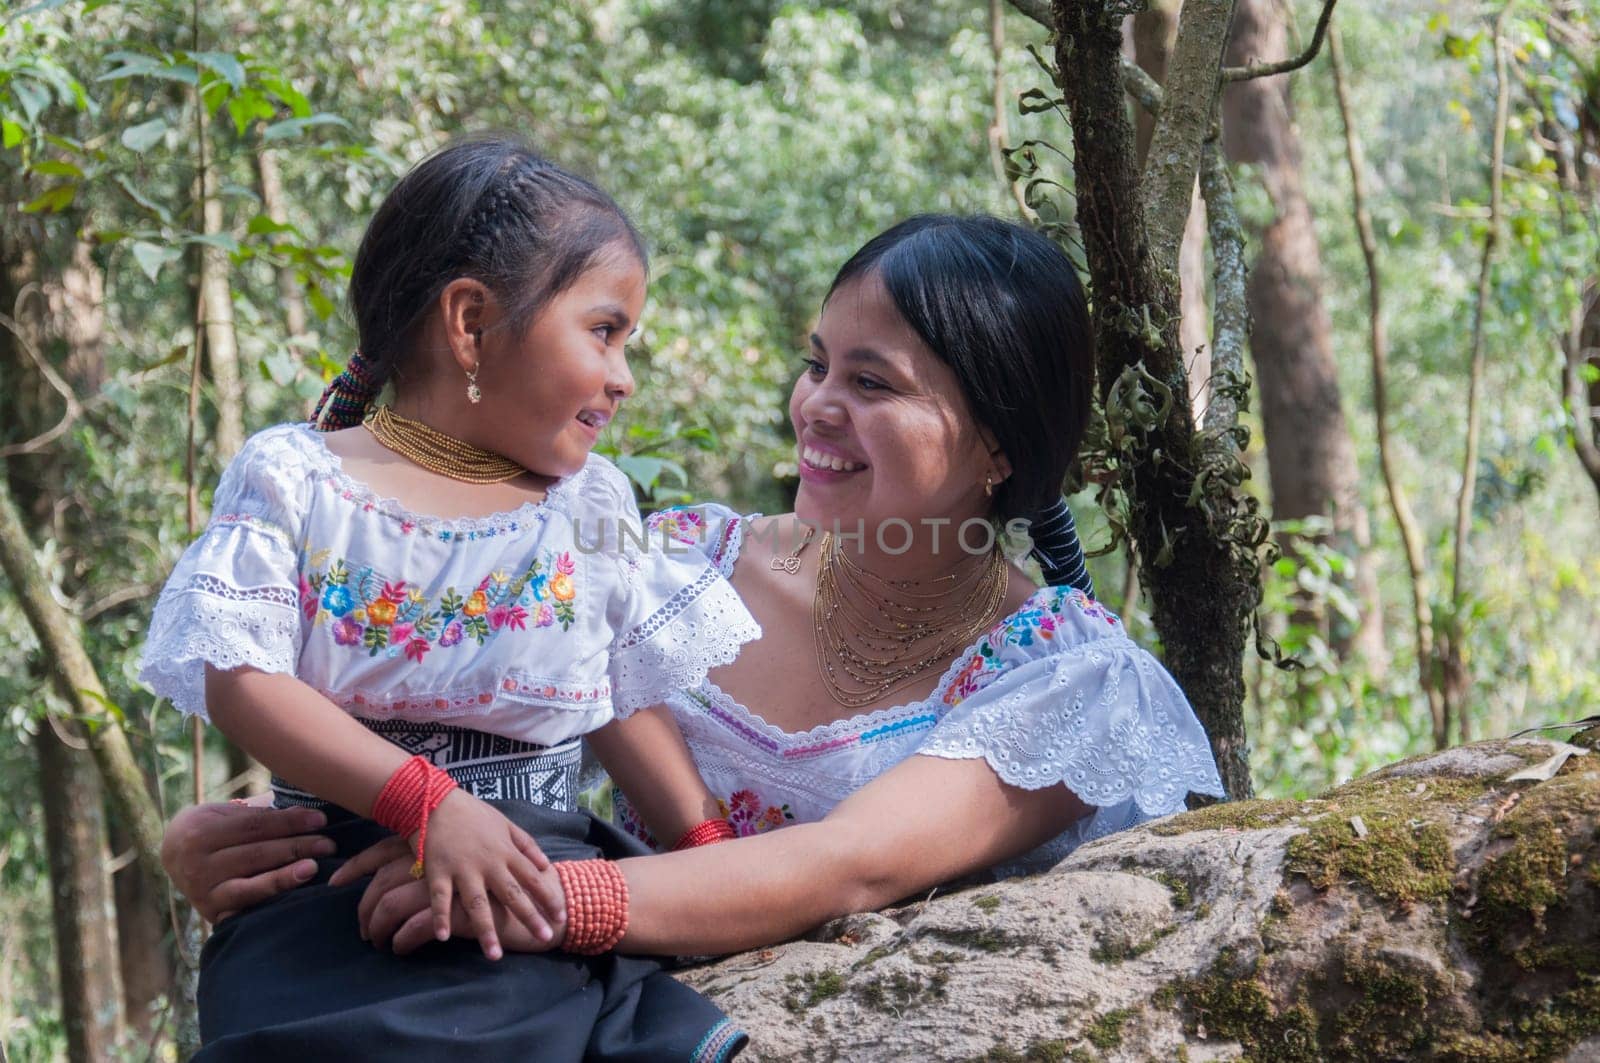 complicit glances between a young mother and her young daughter native ecuadorian women in the jungle of ecuador with traditional dresses of their culture of cotacachi. women's day by Raulmartin